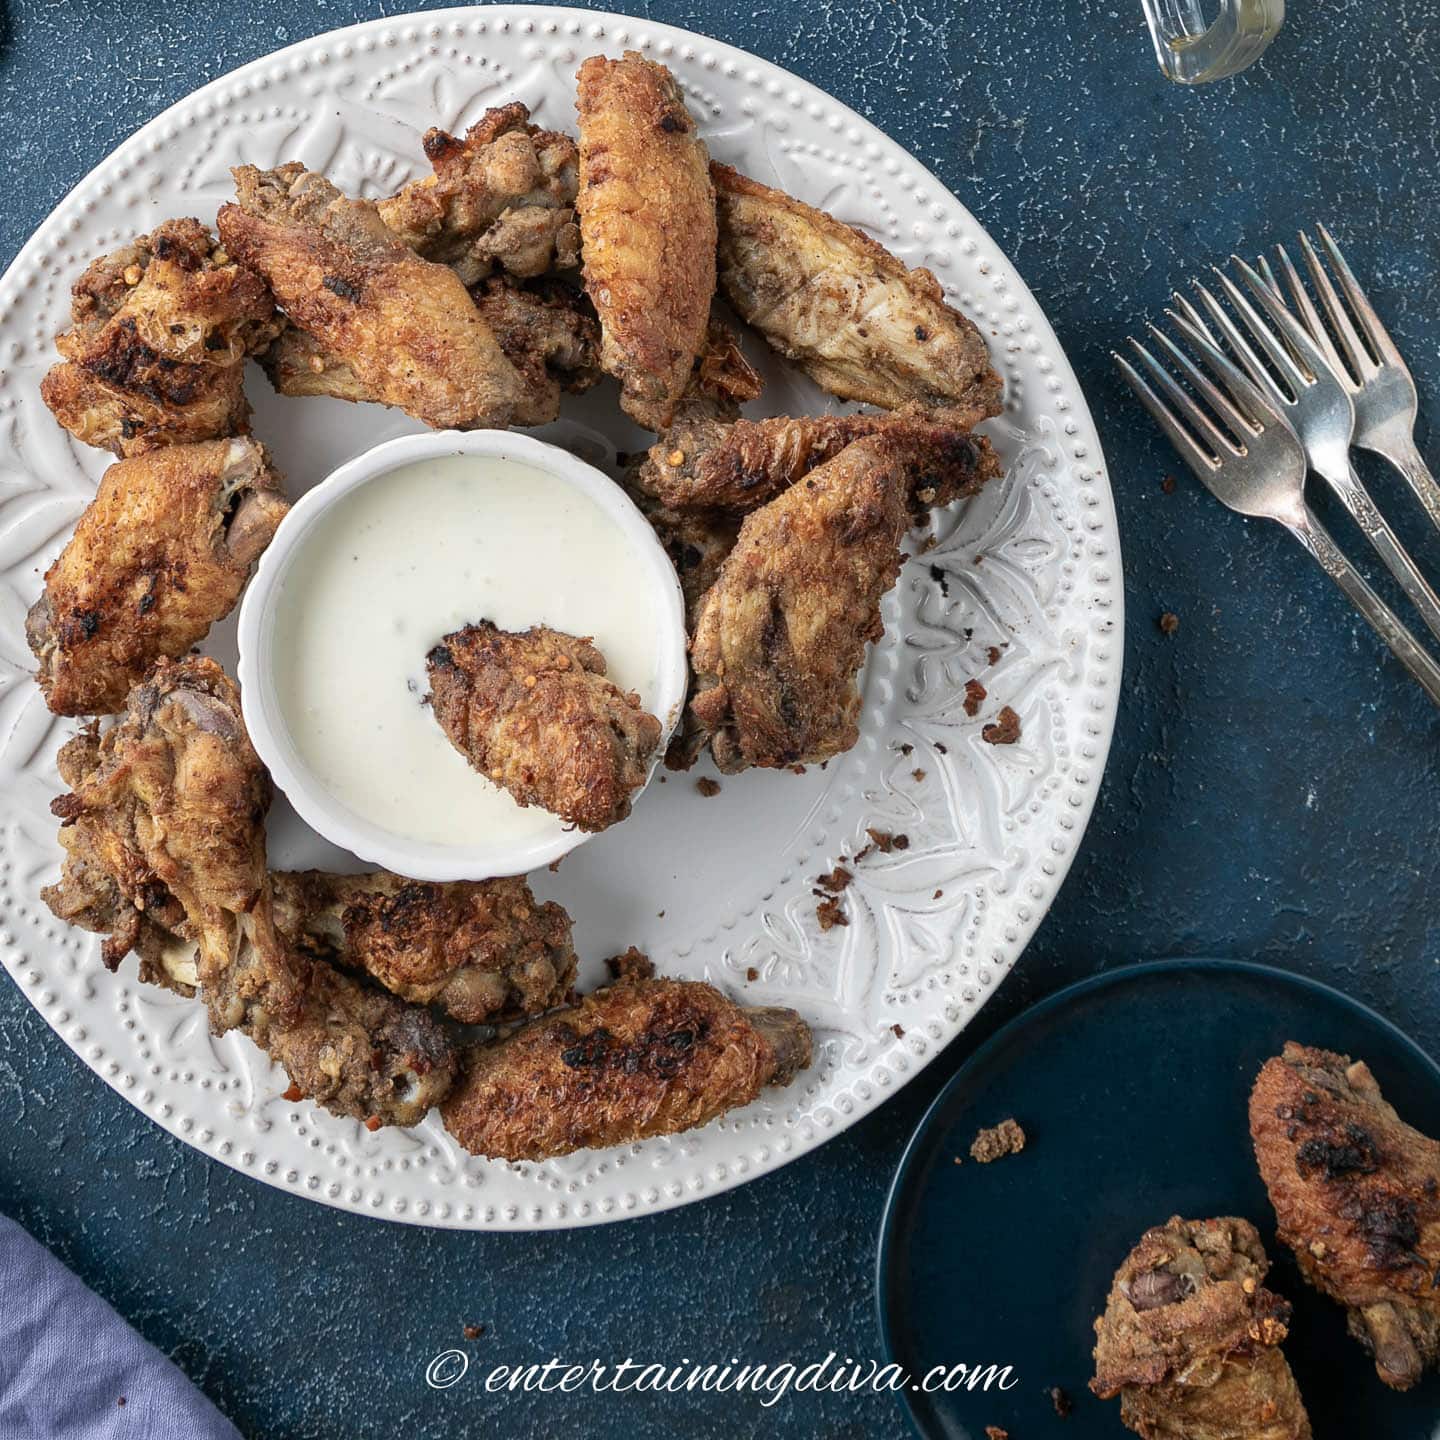 marinated spicy chicken wing being dipped in a bowl of blue cheese dressing surrounded by more wings